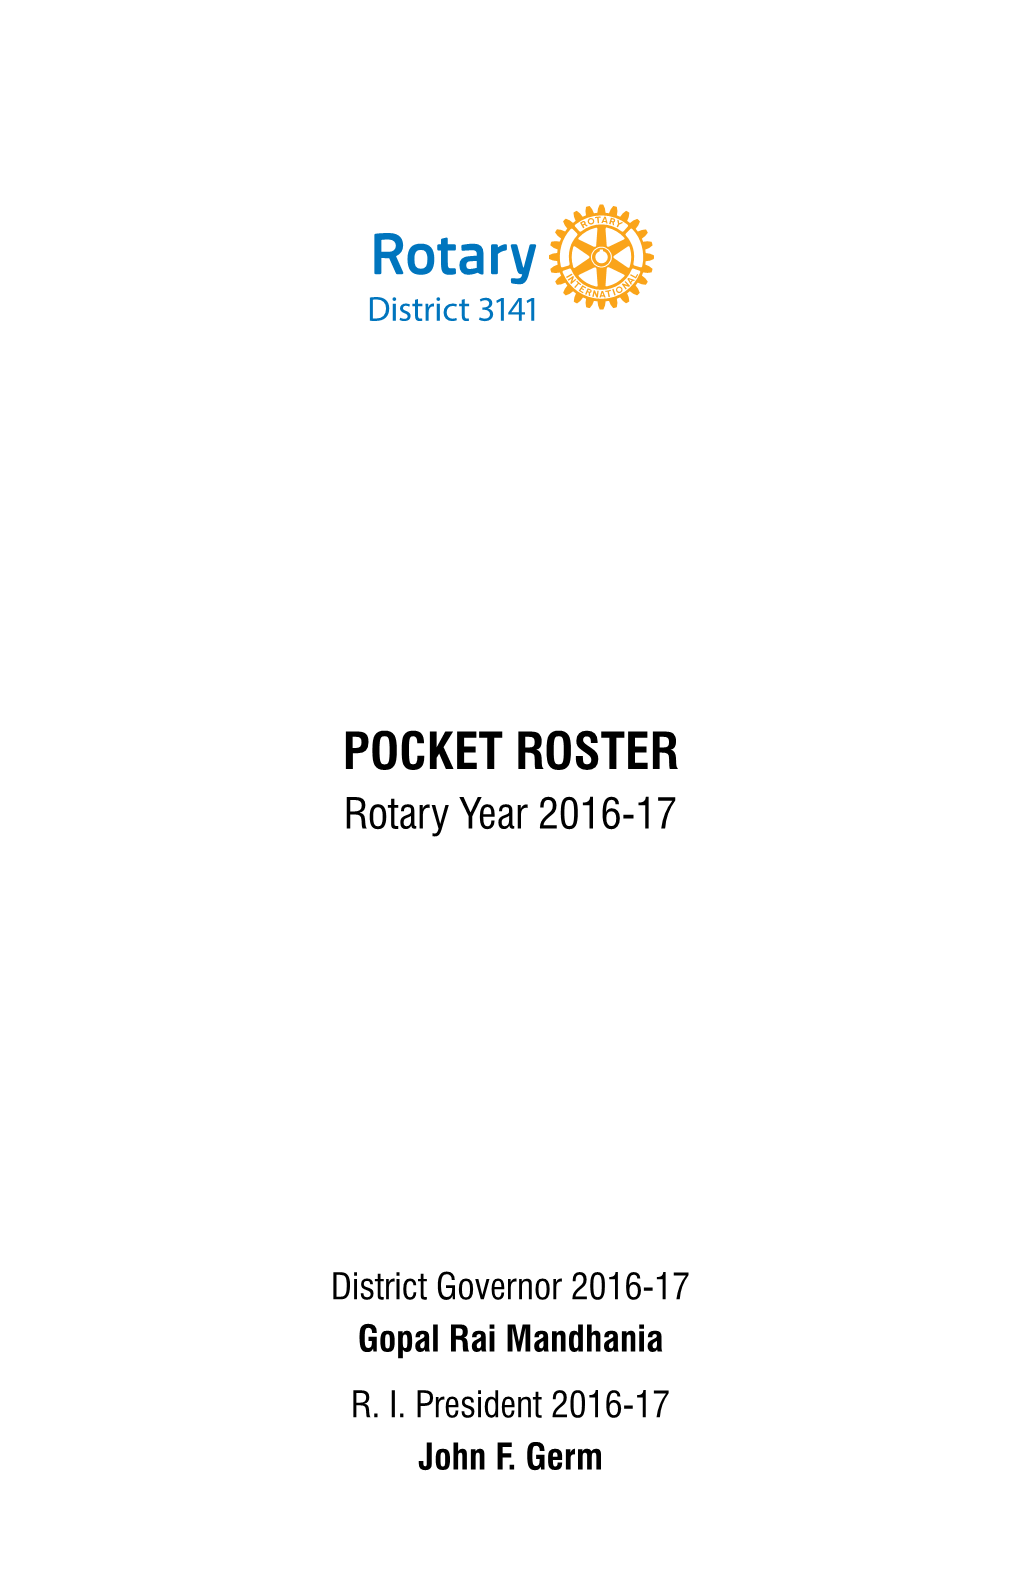 POCKET ROSTER Rotary Year 2016-17